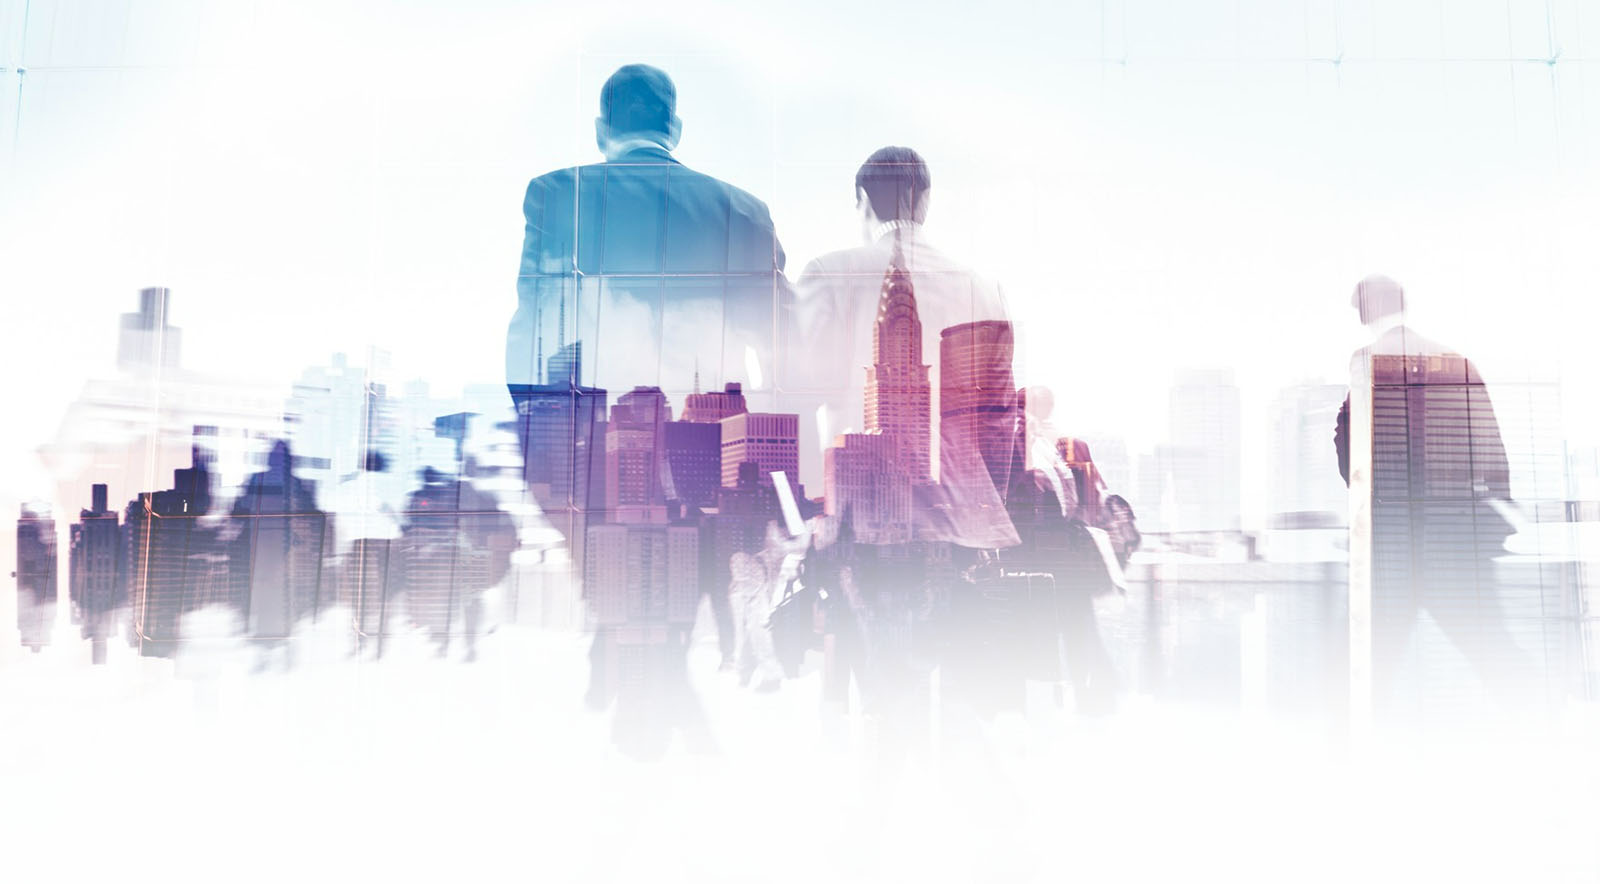 Double exposure of city buildings and a businessman